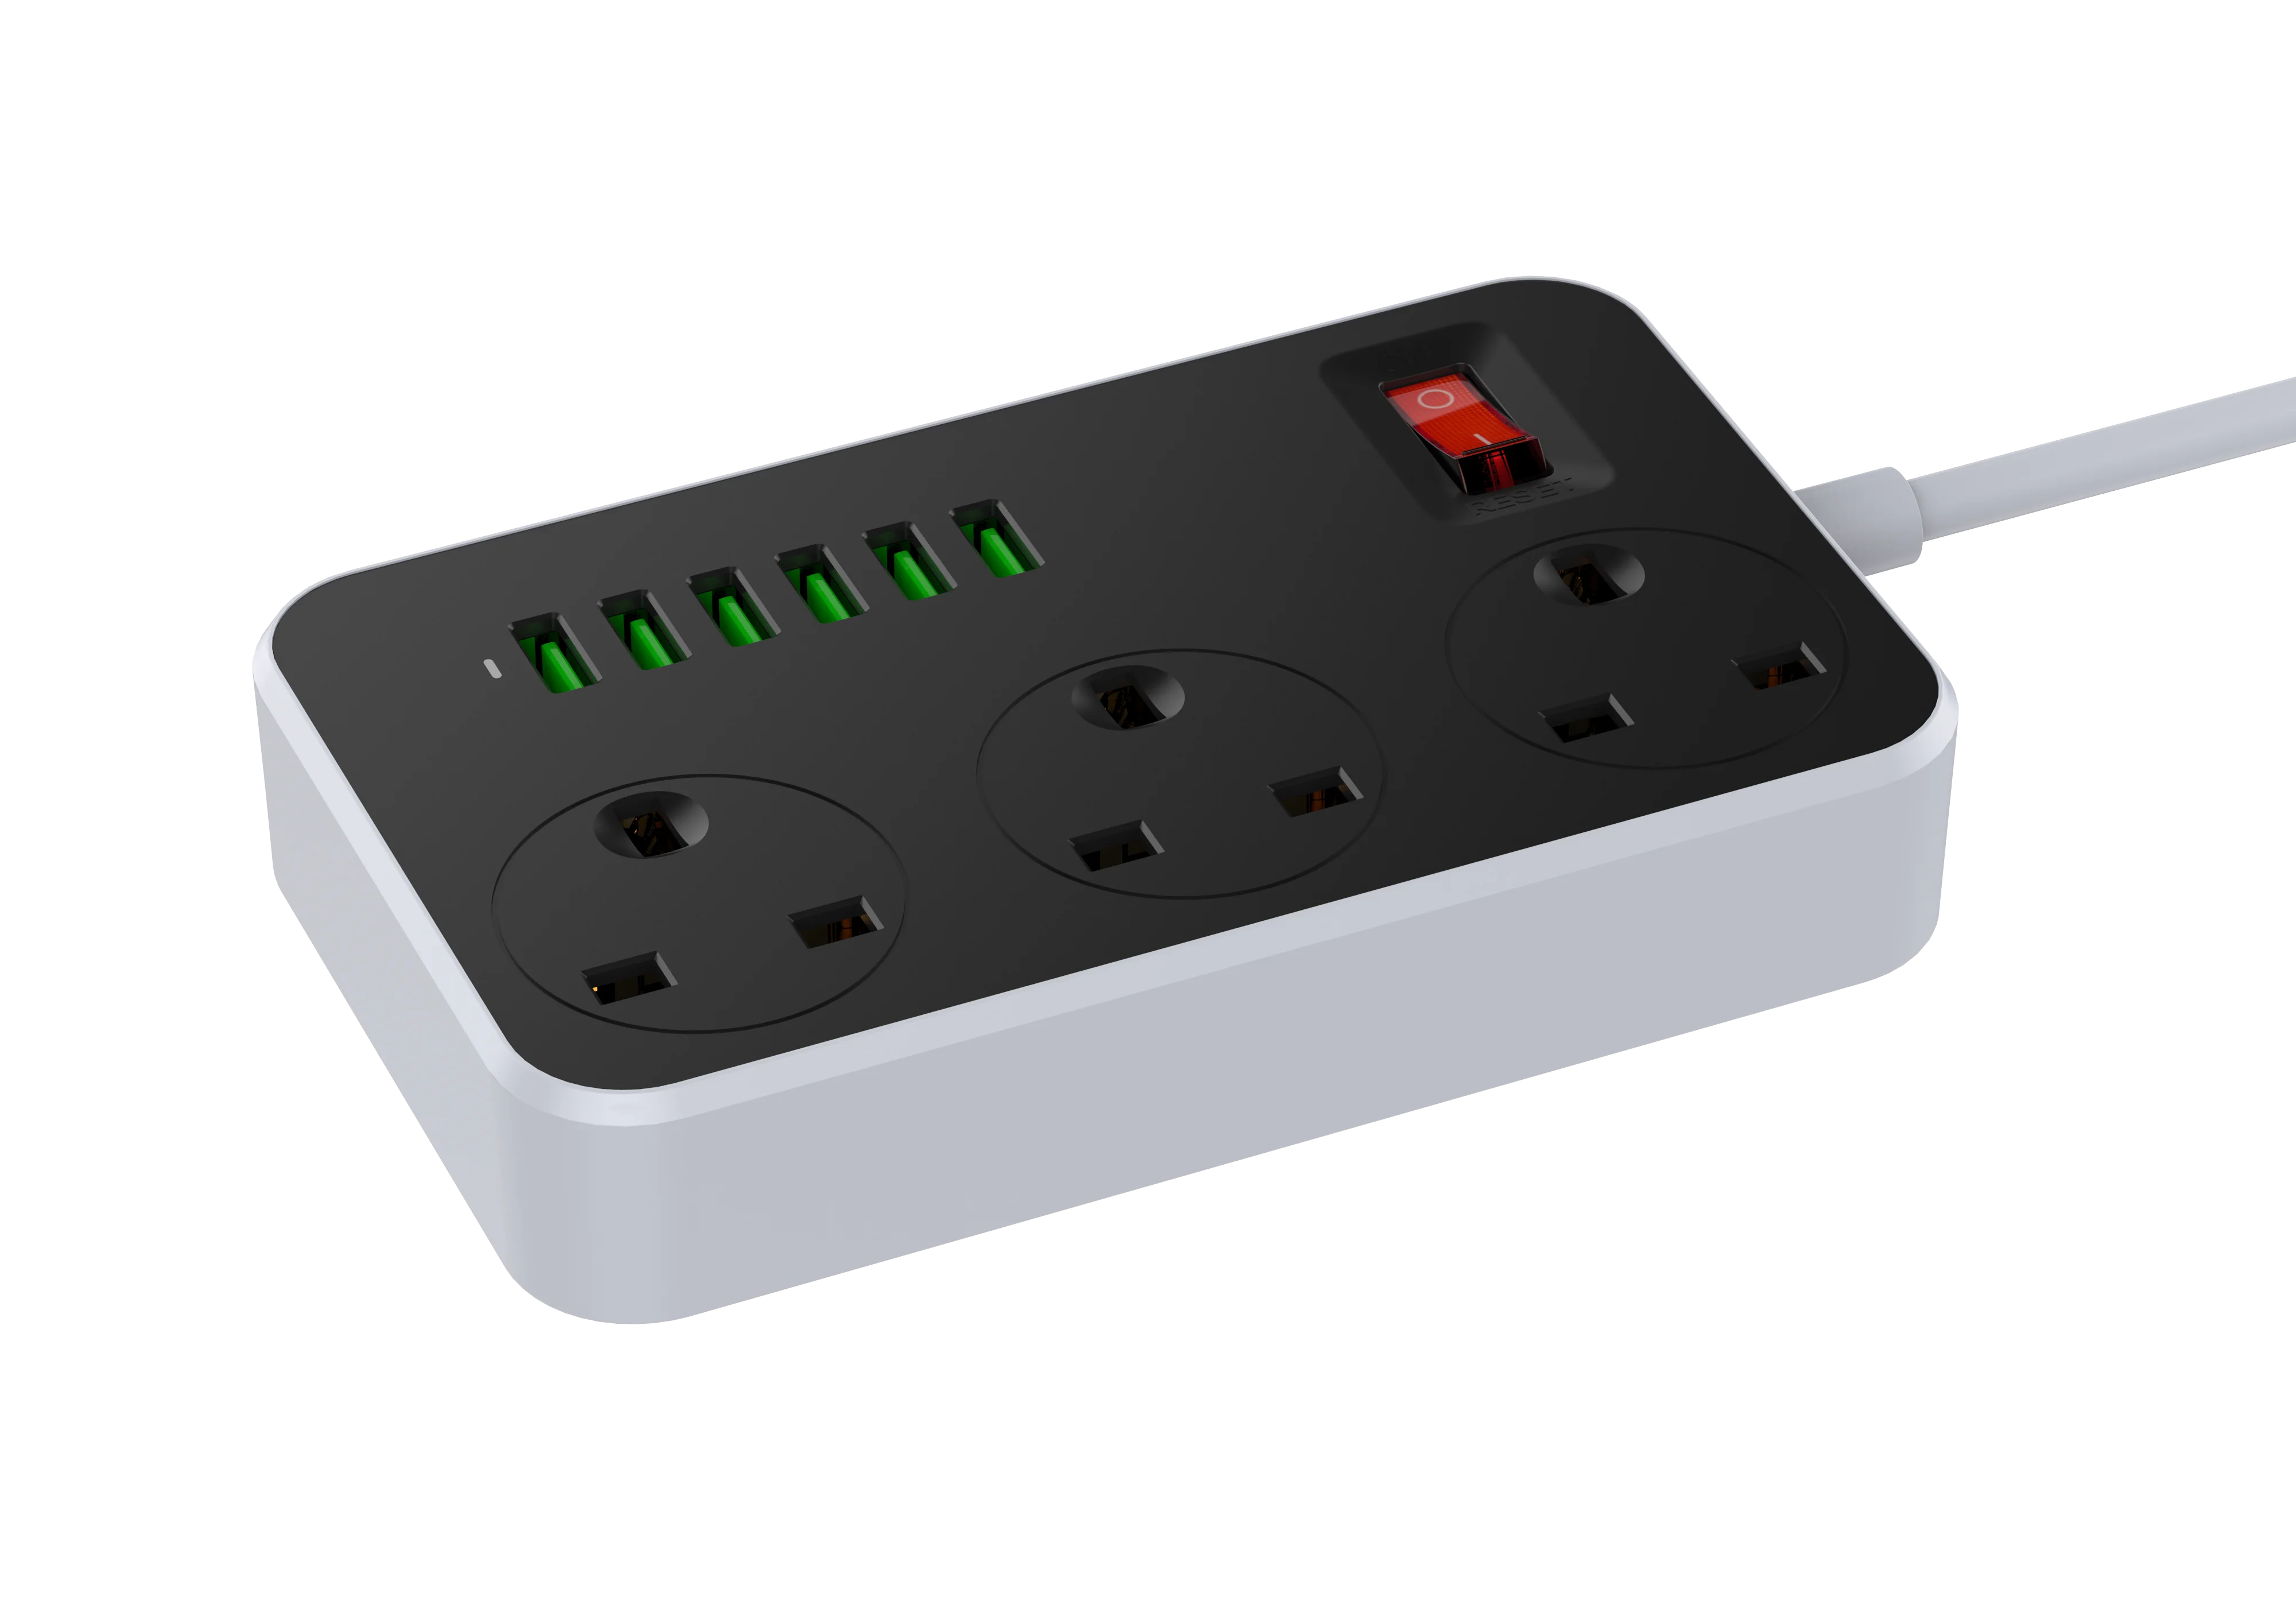 
LDNIO CLASSIC UK STANDARD 3 WAY SURGE POWER STRIP SK3662 WITH 6USB PORTS 2METERS POWER CORD POWER STRIP 